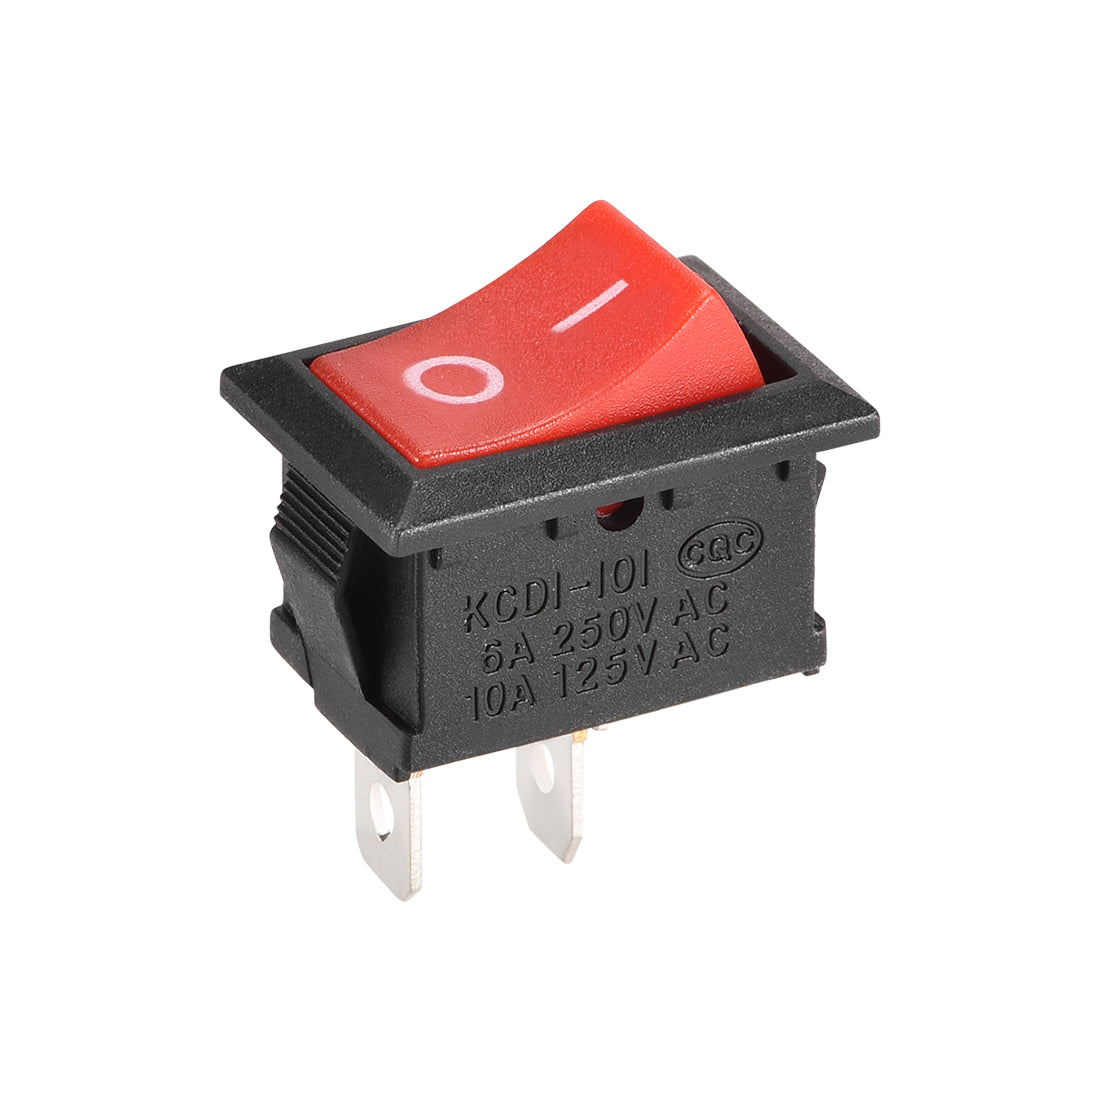 uxcell Uxcell Mini Boat Rocker Switch Black Toggle Switch 2pins ON/OFF AC 250V/6A 125V/10A